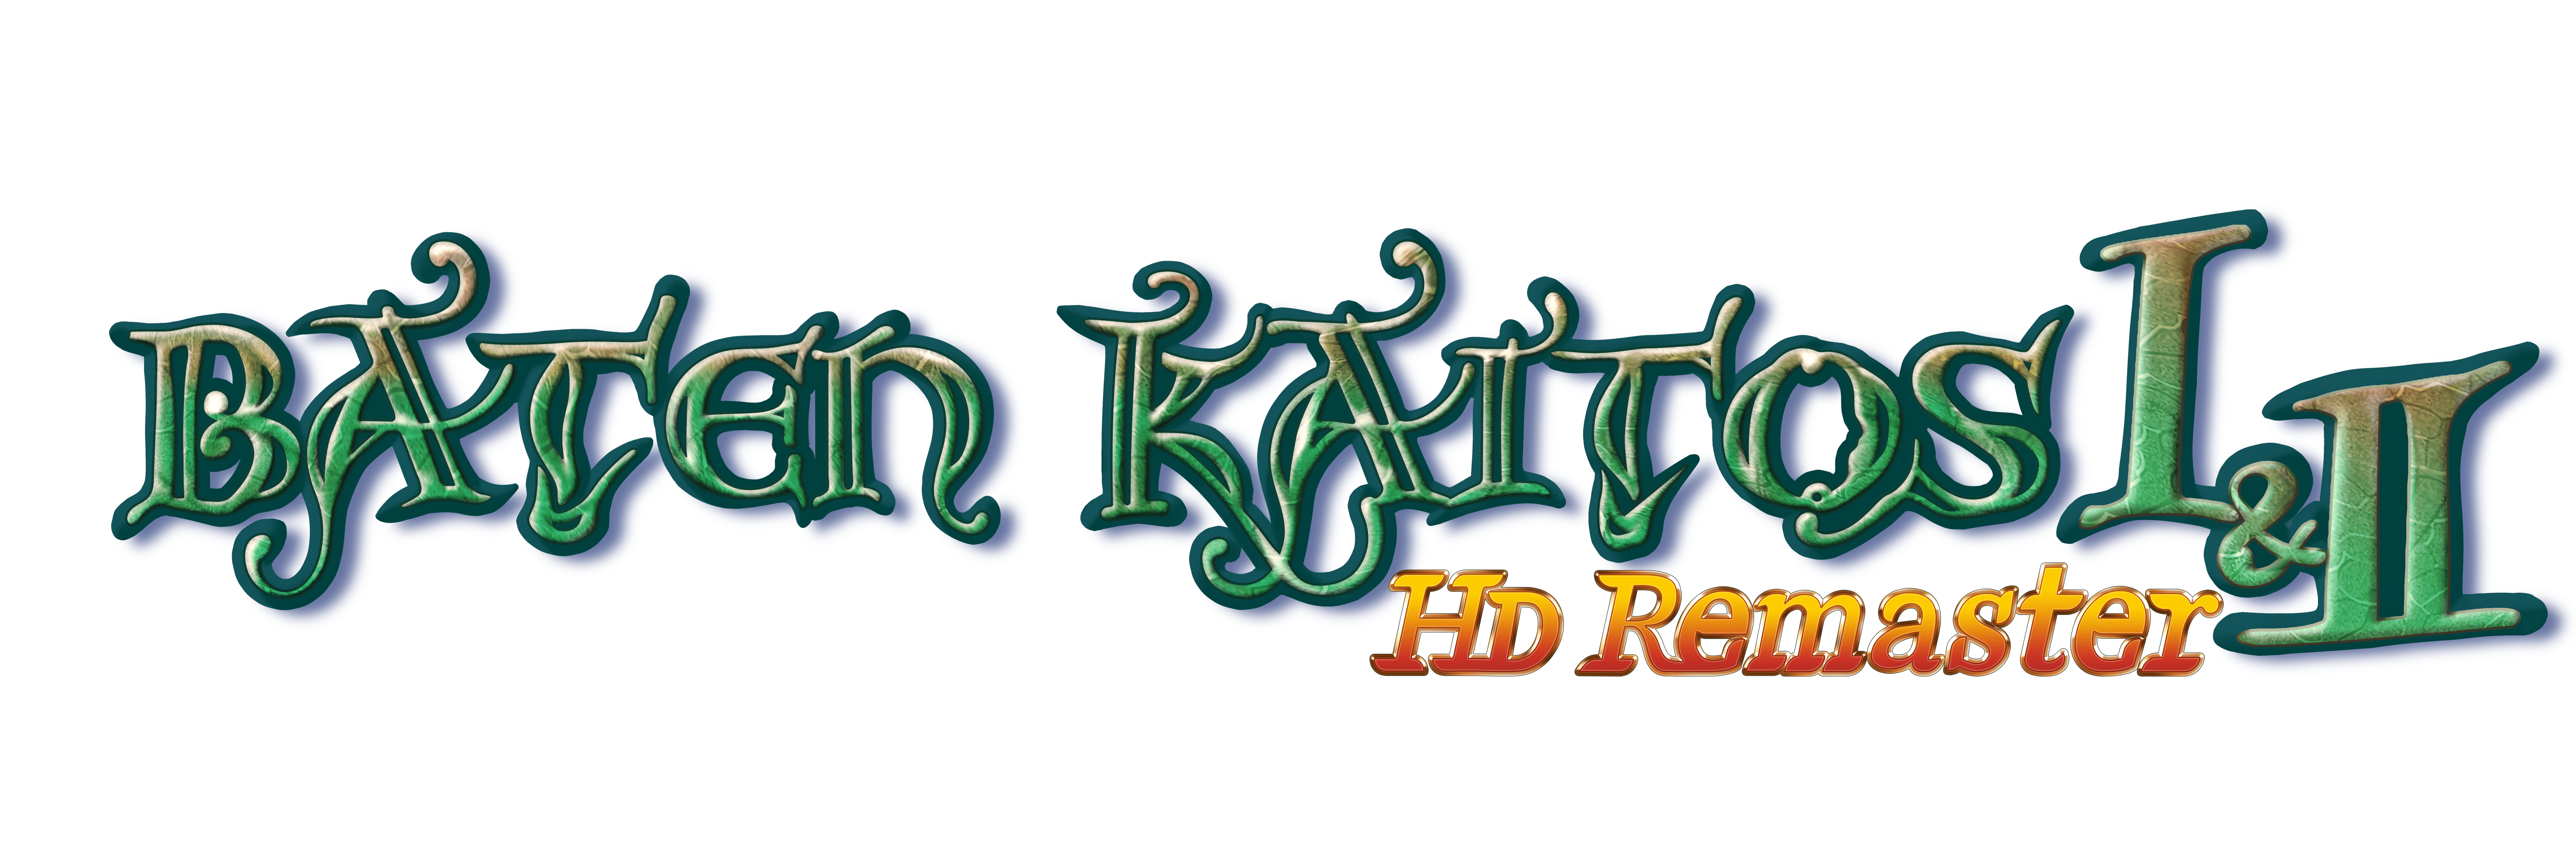 Baten Kaitos I & II HD Remaster Launches in September for Switch